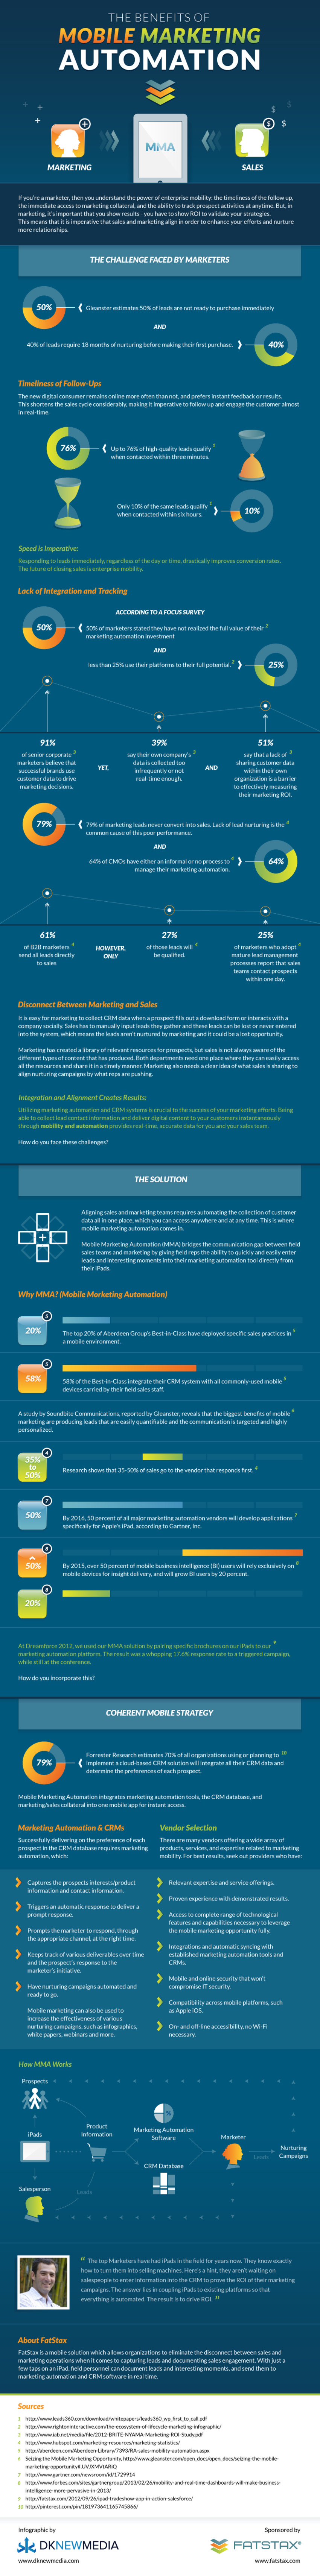 Mobile Marketing Automation Infograph - FatStax | The MarTech Digest | Scoop.it